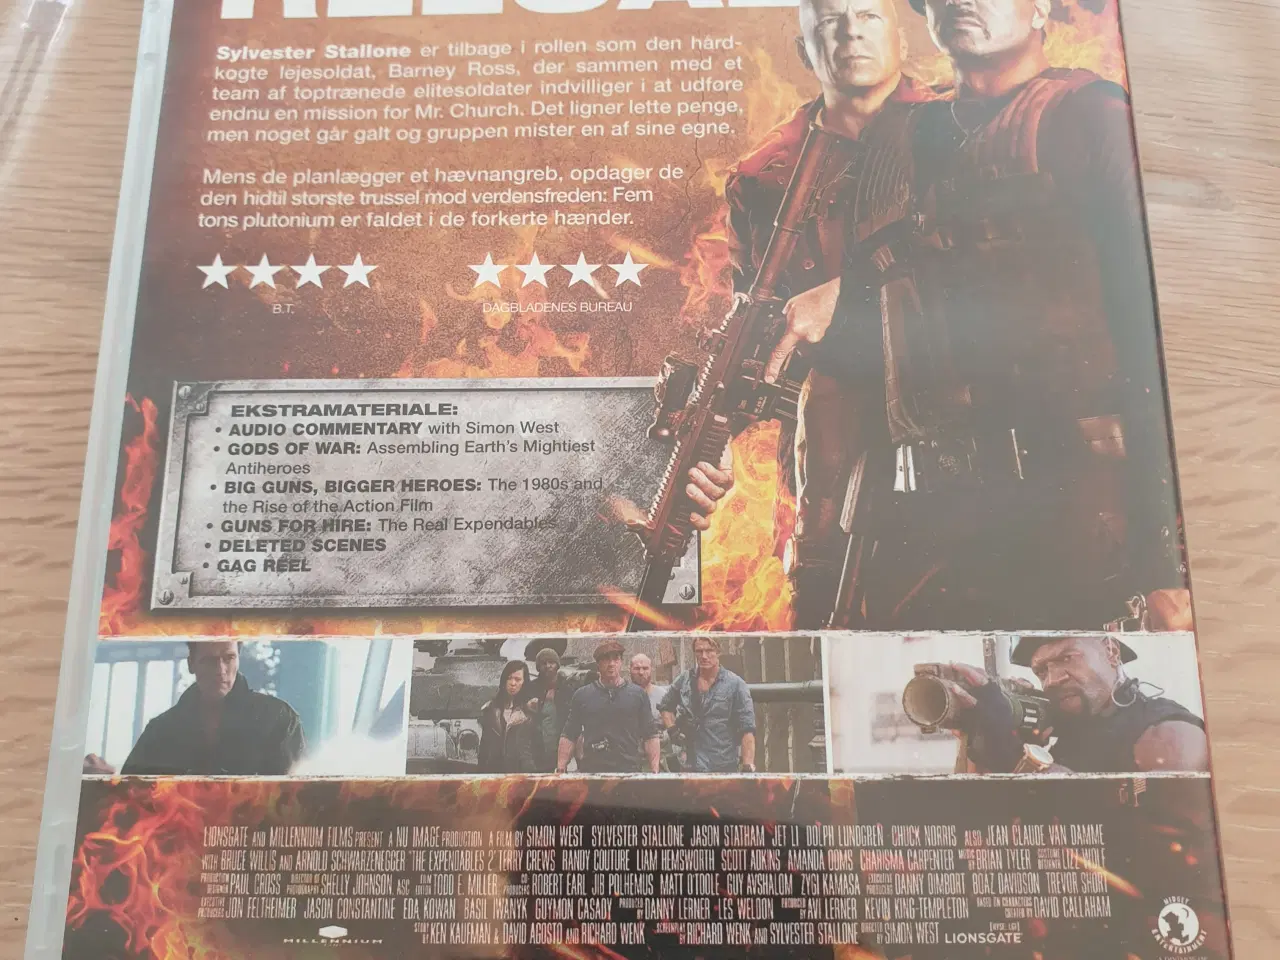 Billede 2 - The Expendables 2